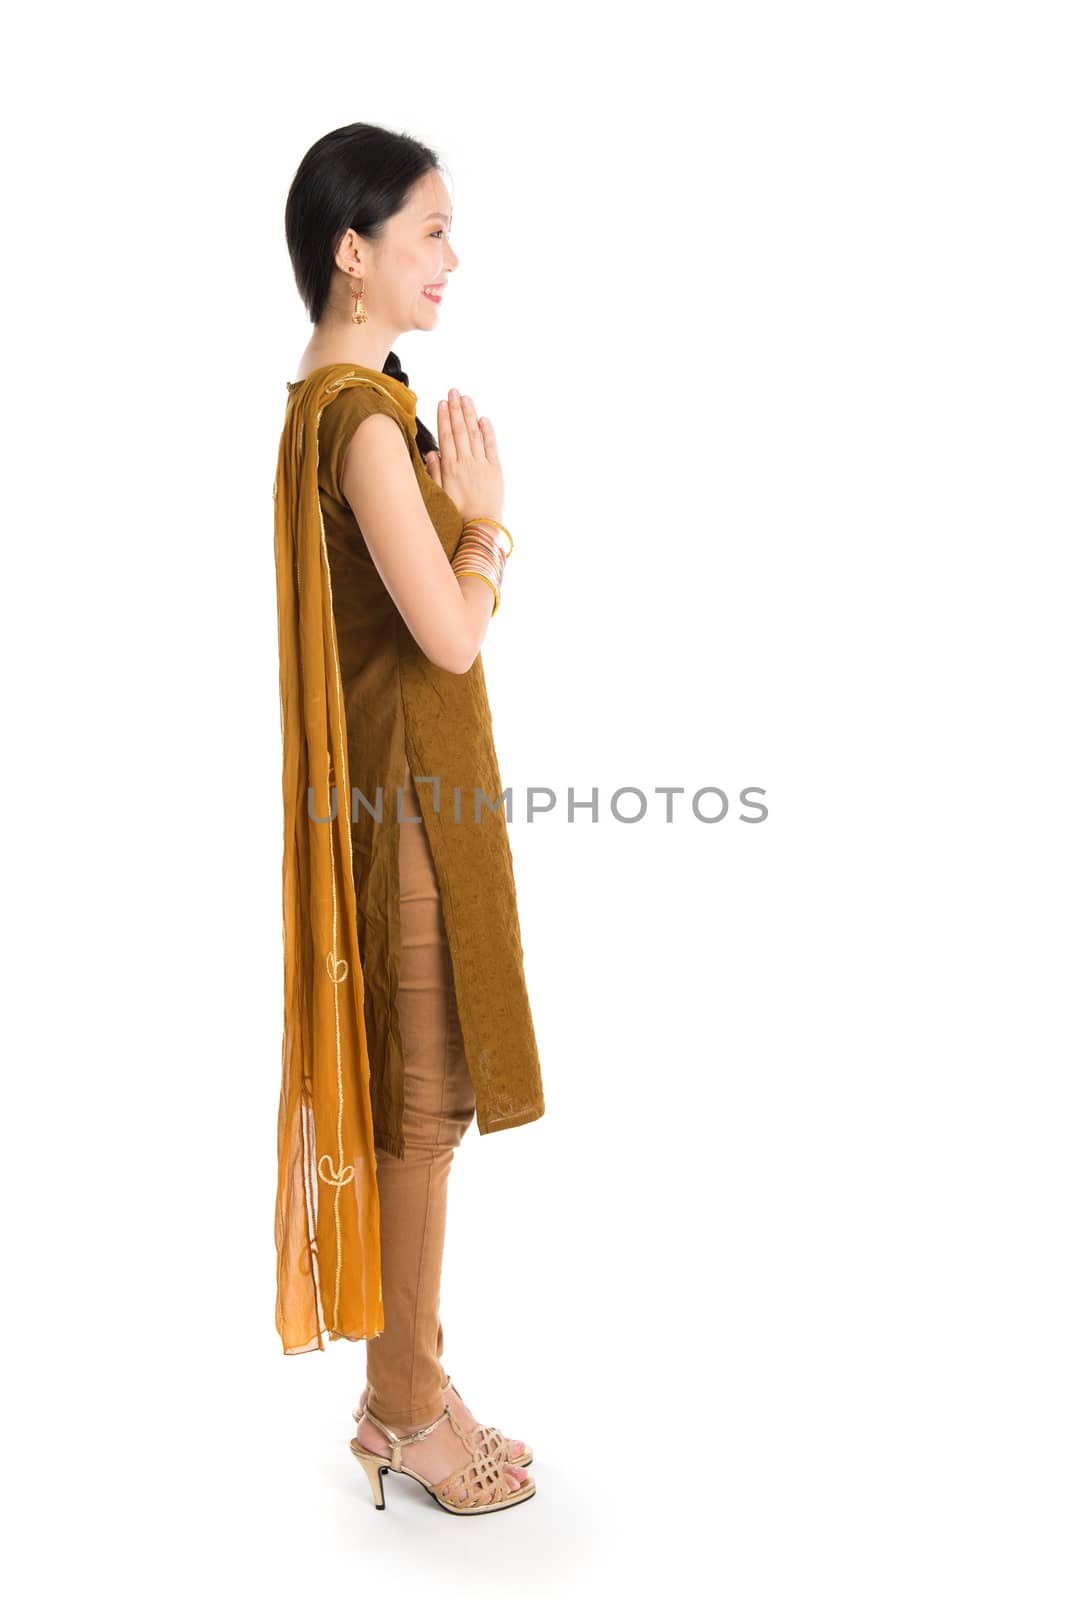 Side view of young mixed race Indian Chinese girl in traditional punjabi dress greeting, full length standing isolated on white background.